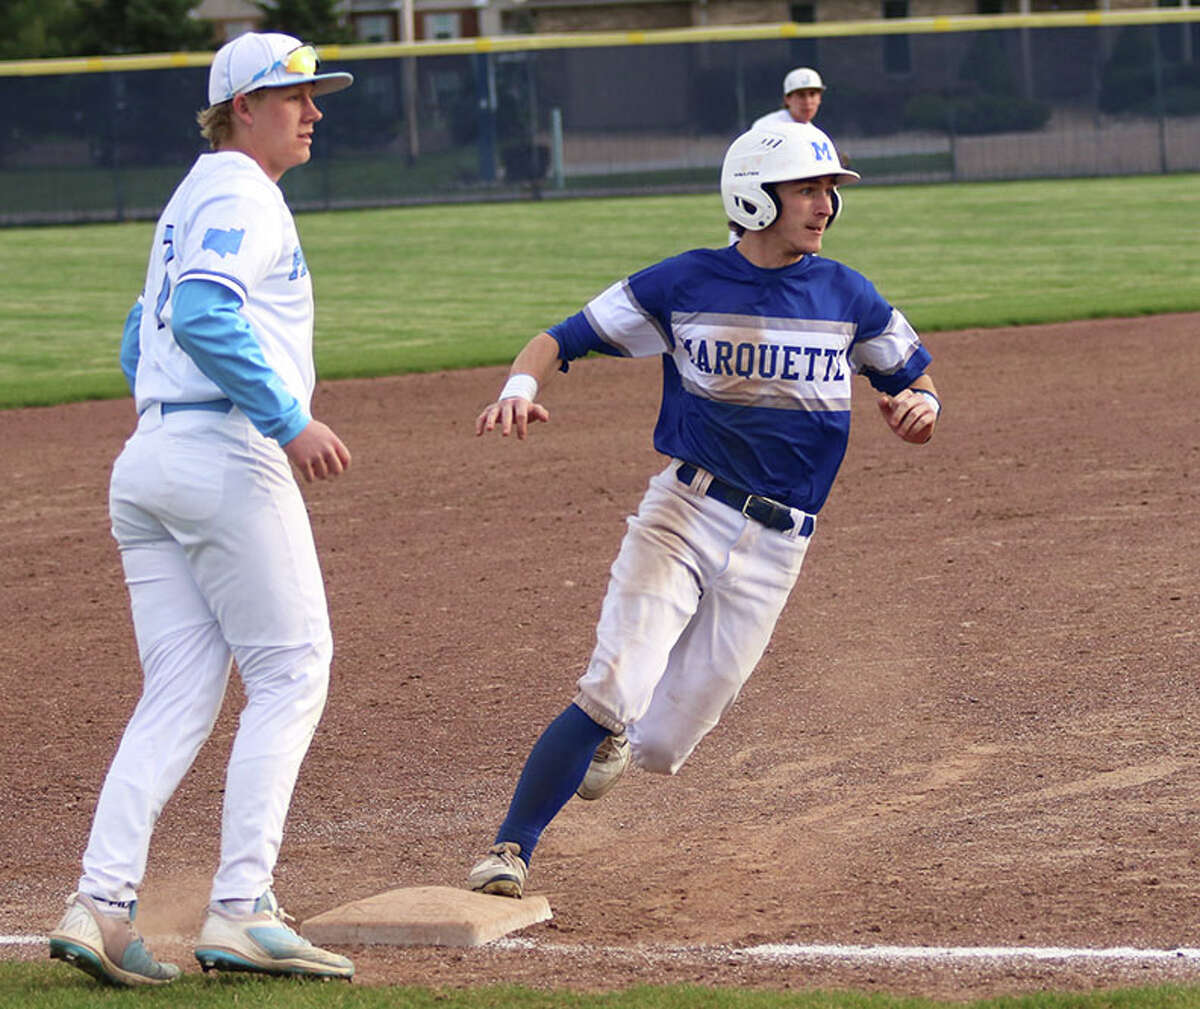 Marquette scores first seven runs, holds off Jersey, 8-6